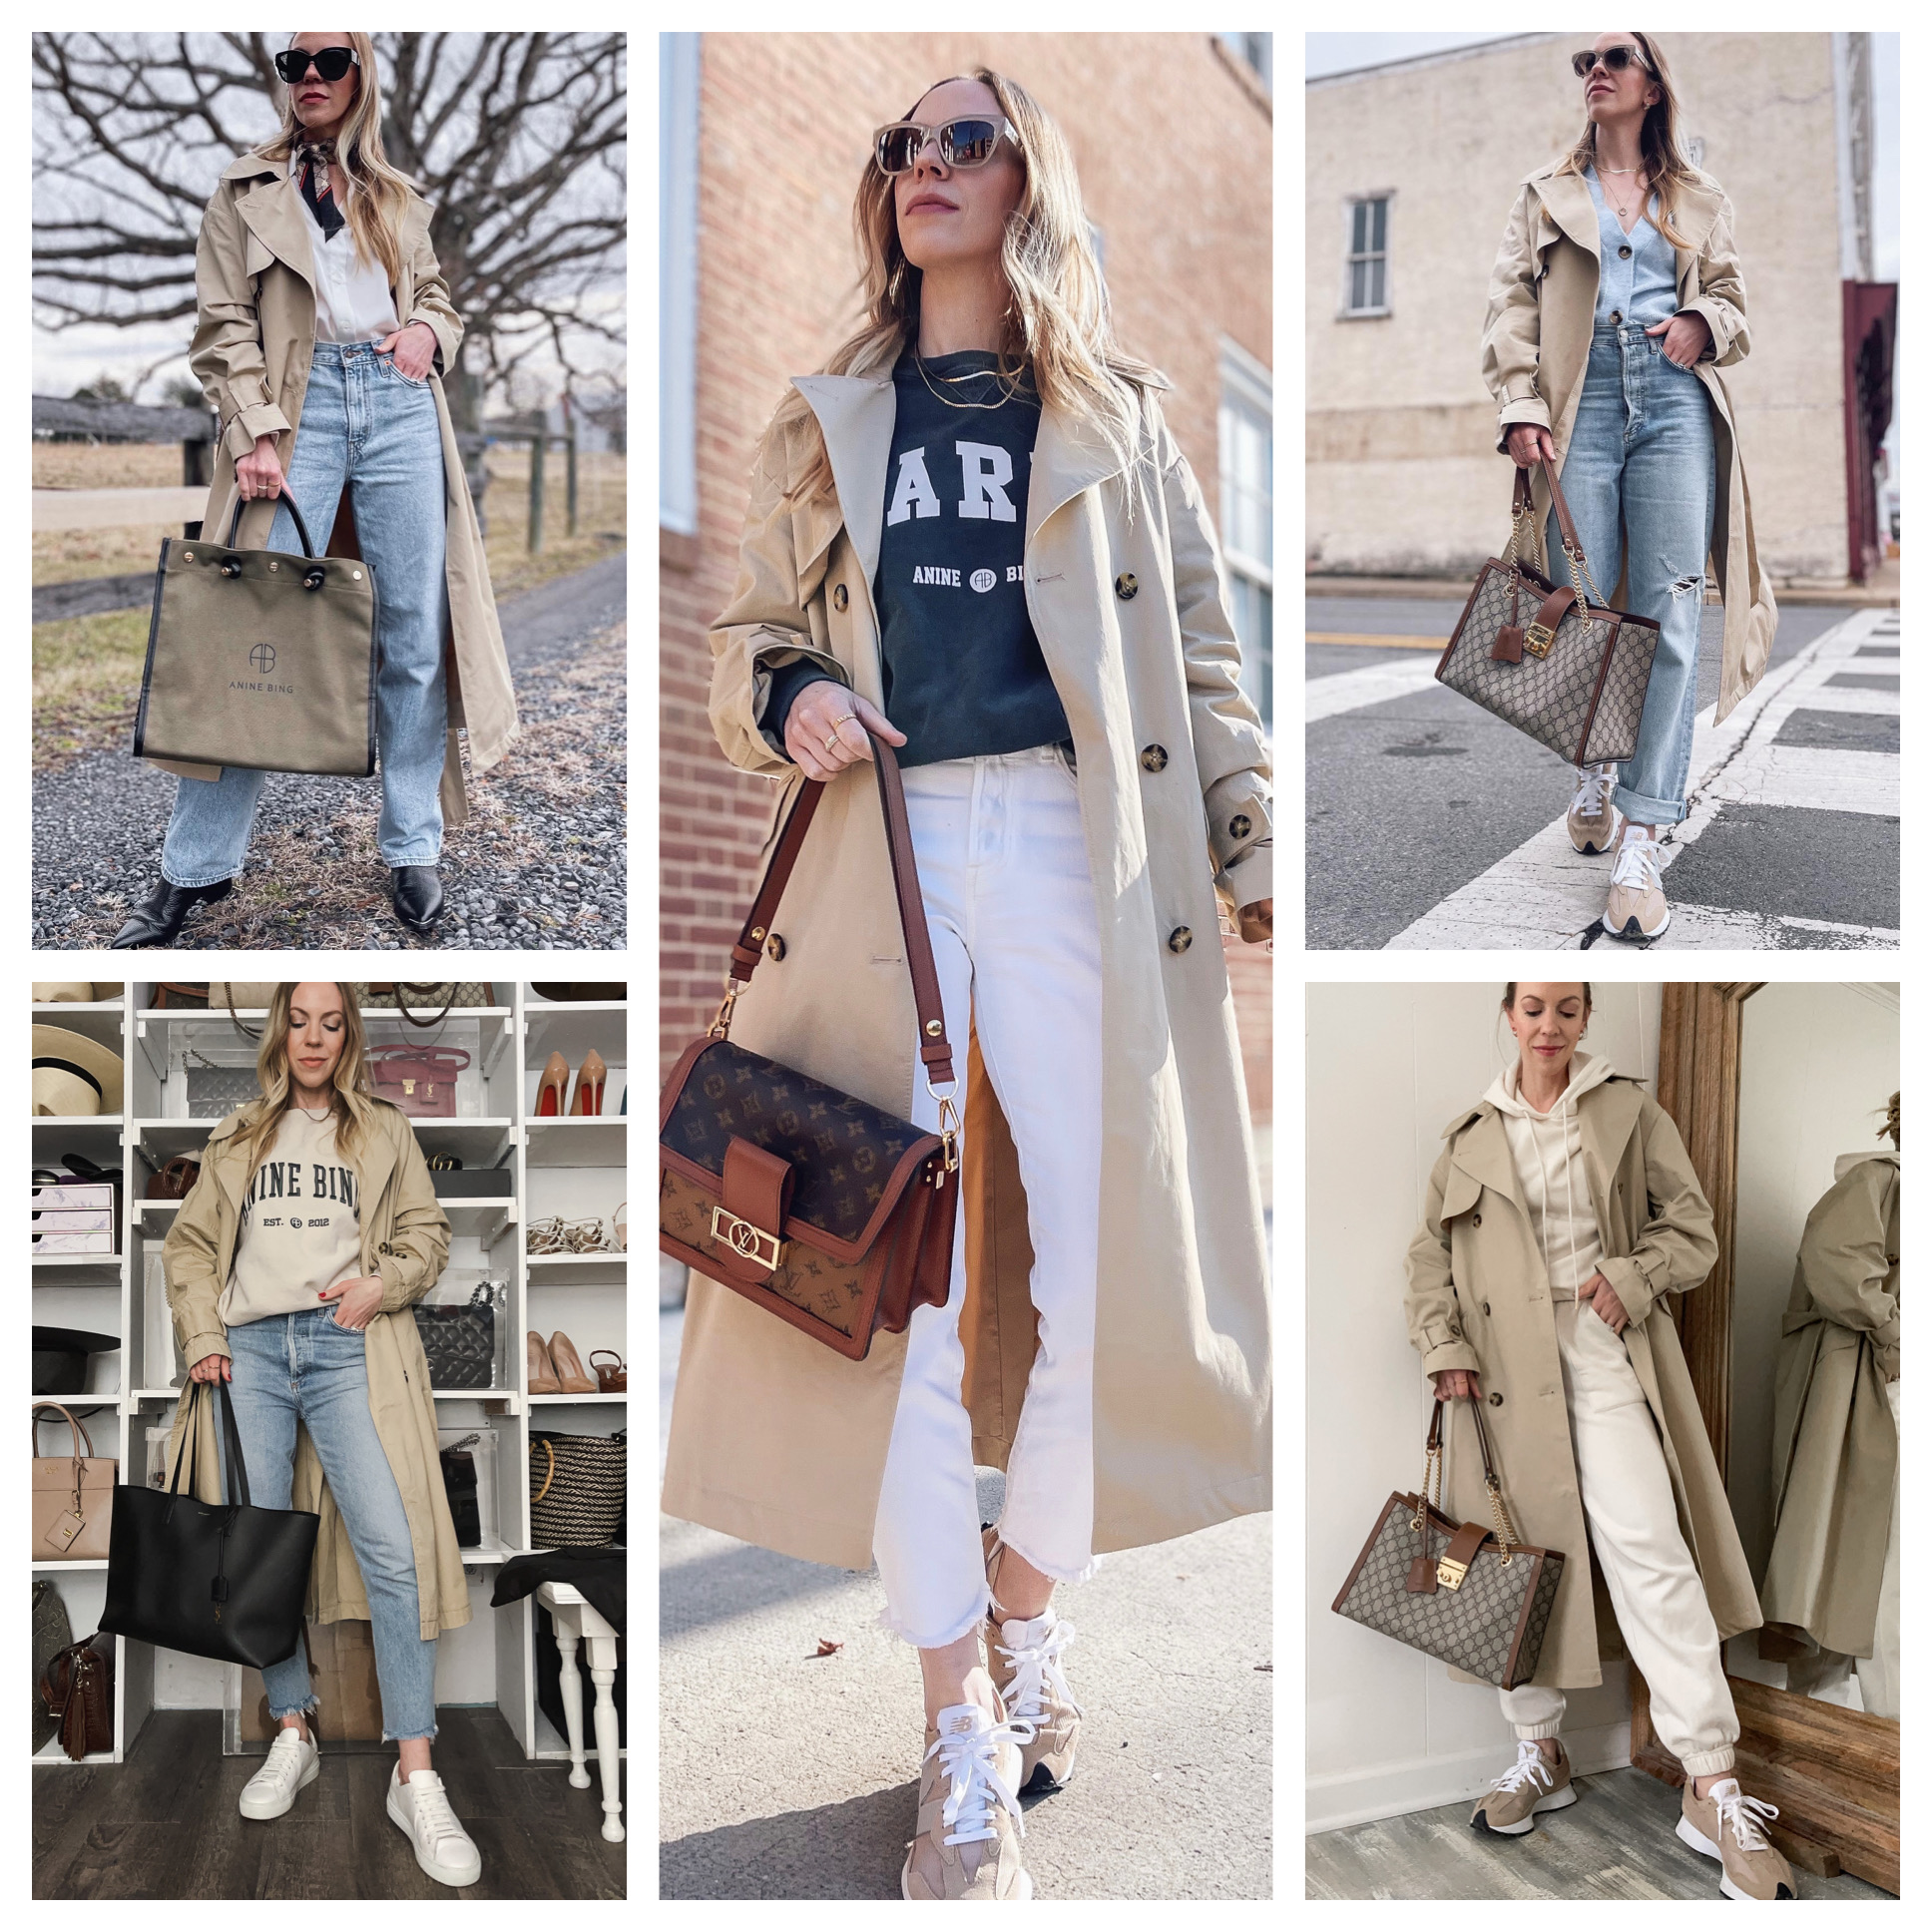 Contain Few Inward Trench Coat Outfit Ideas for Transitional Spring Weather - Meagan's Moda